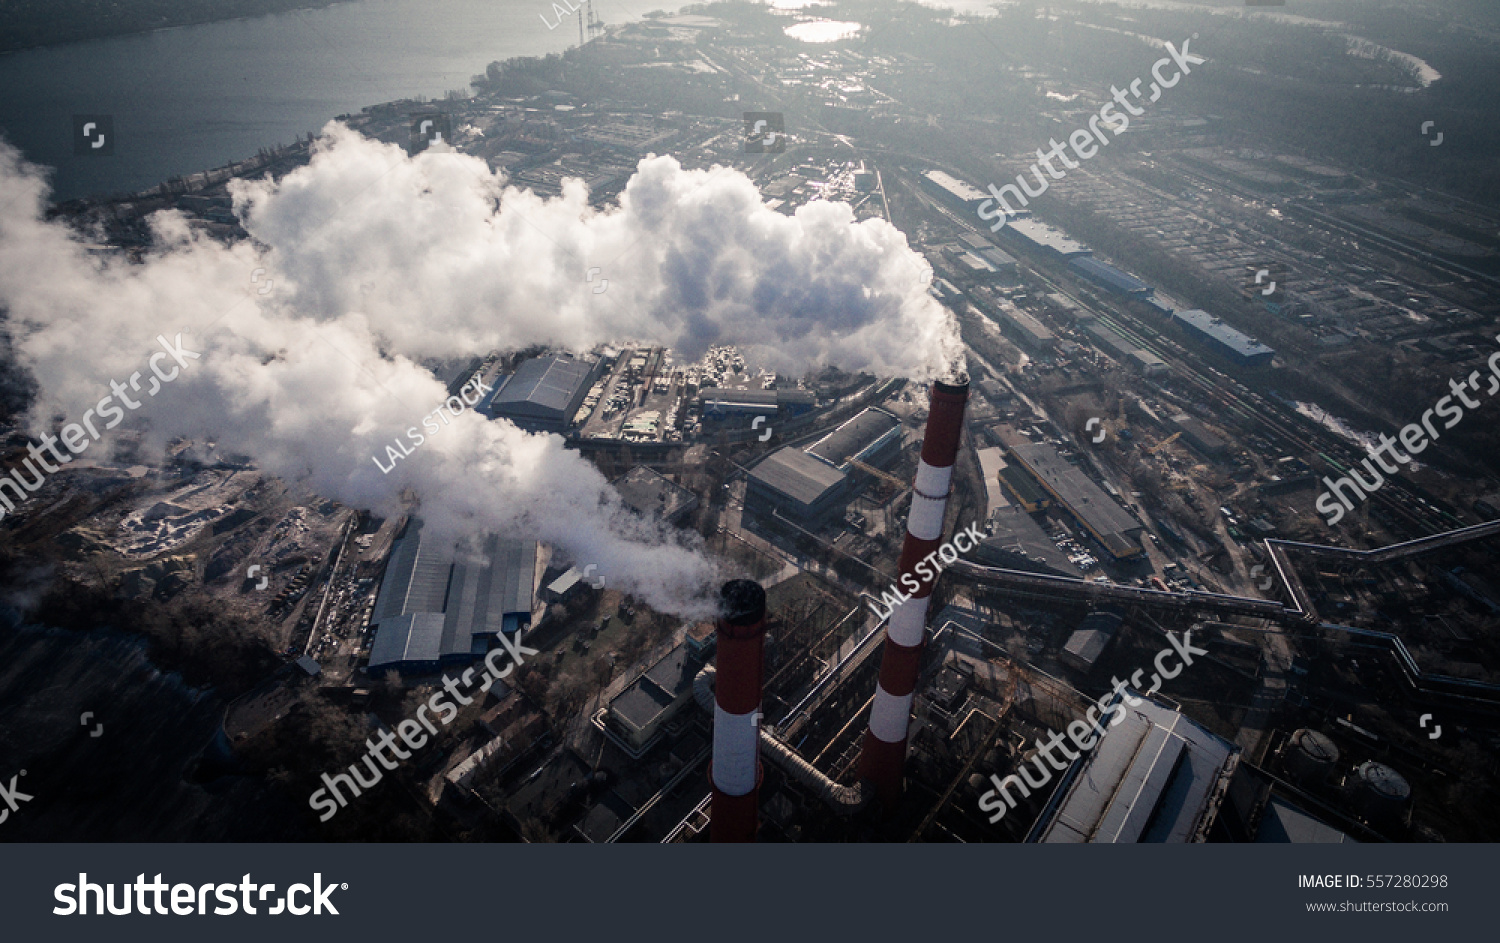 Air pollution by smoke coming out of two factory chimneys. Industrial zone in the city. Kiev, Ukraine, aerial view #557280298